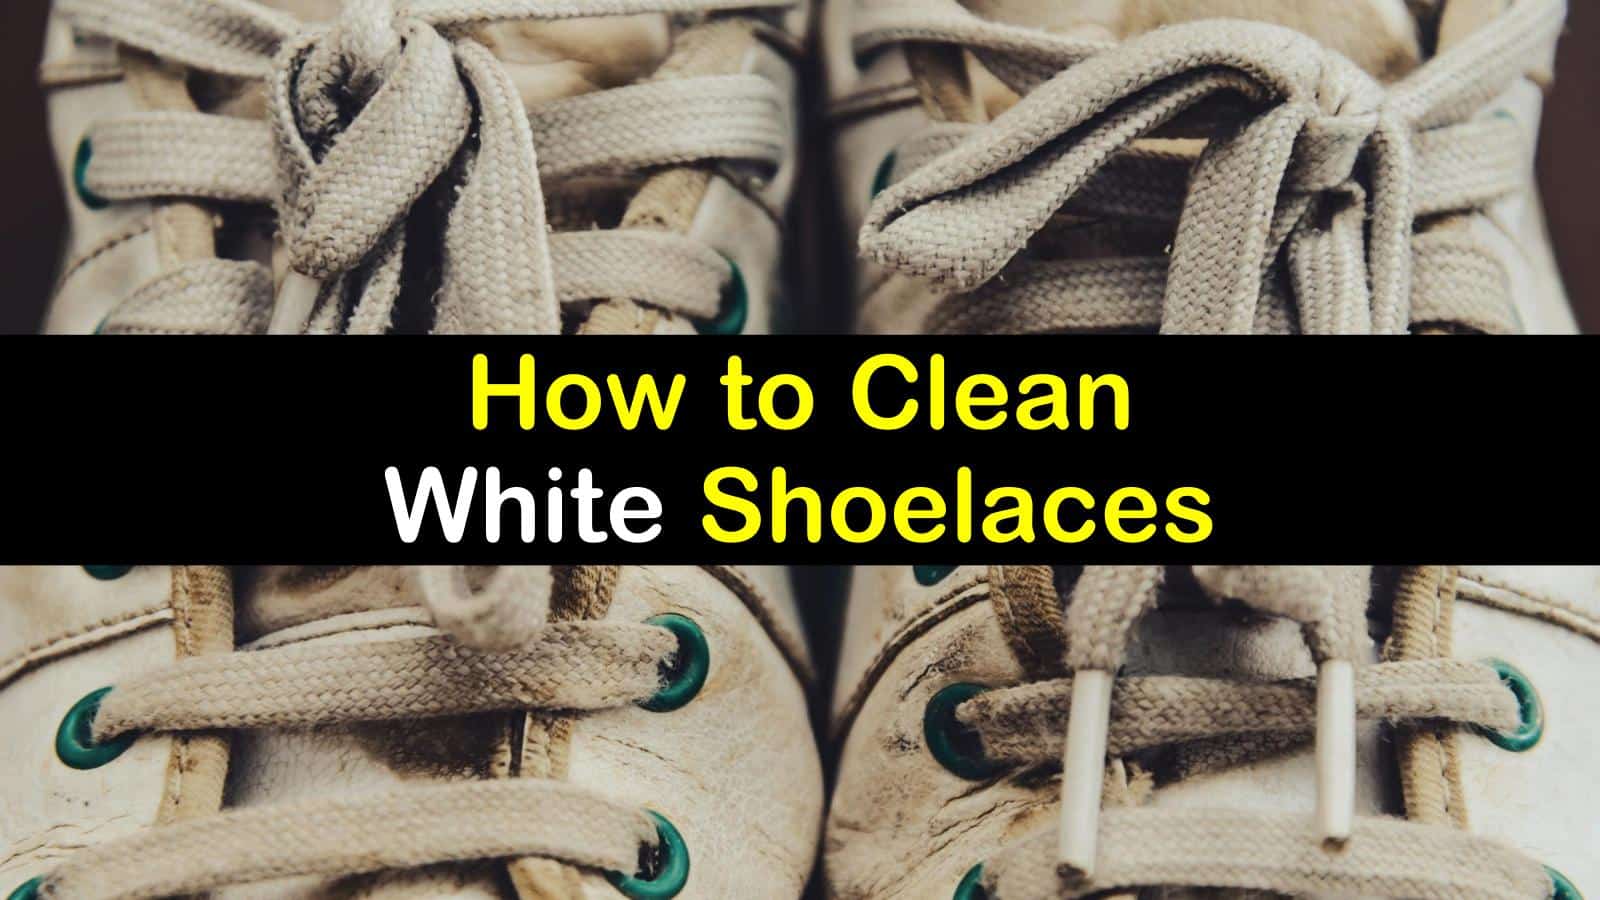 how to clean converse shoelaces